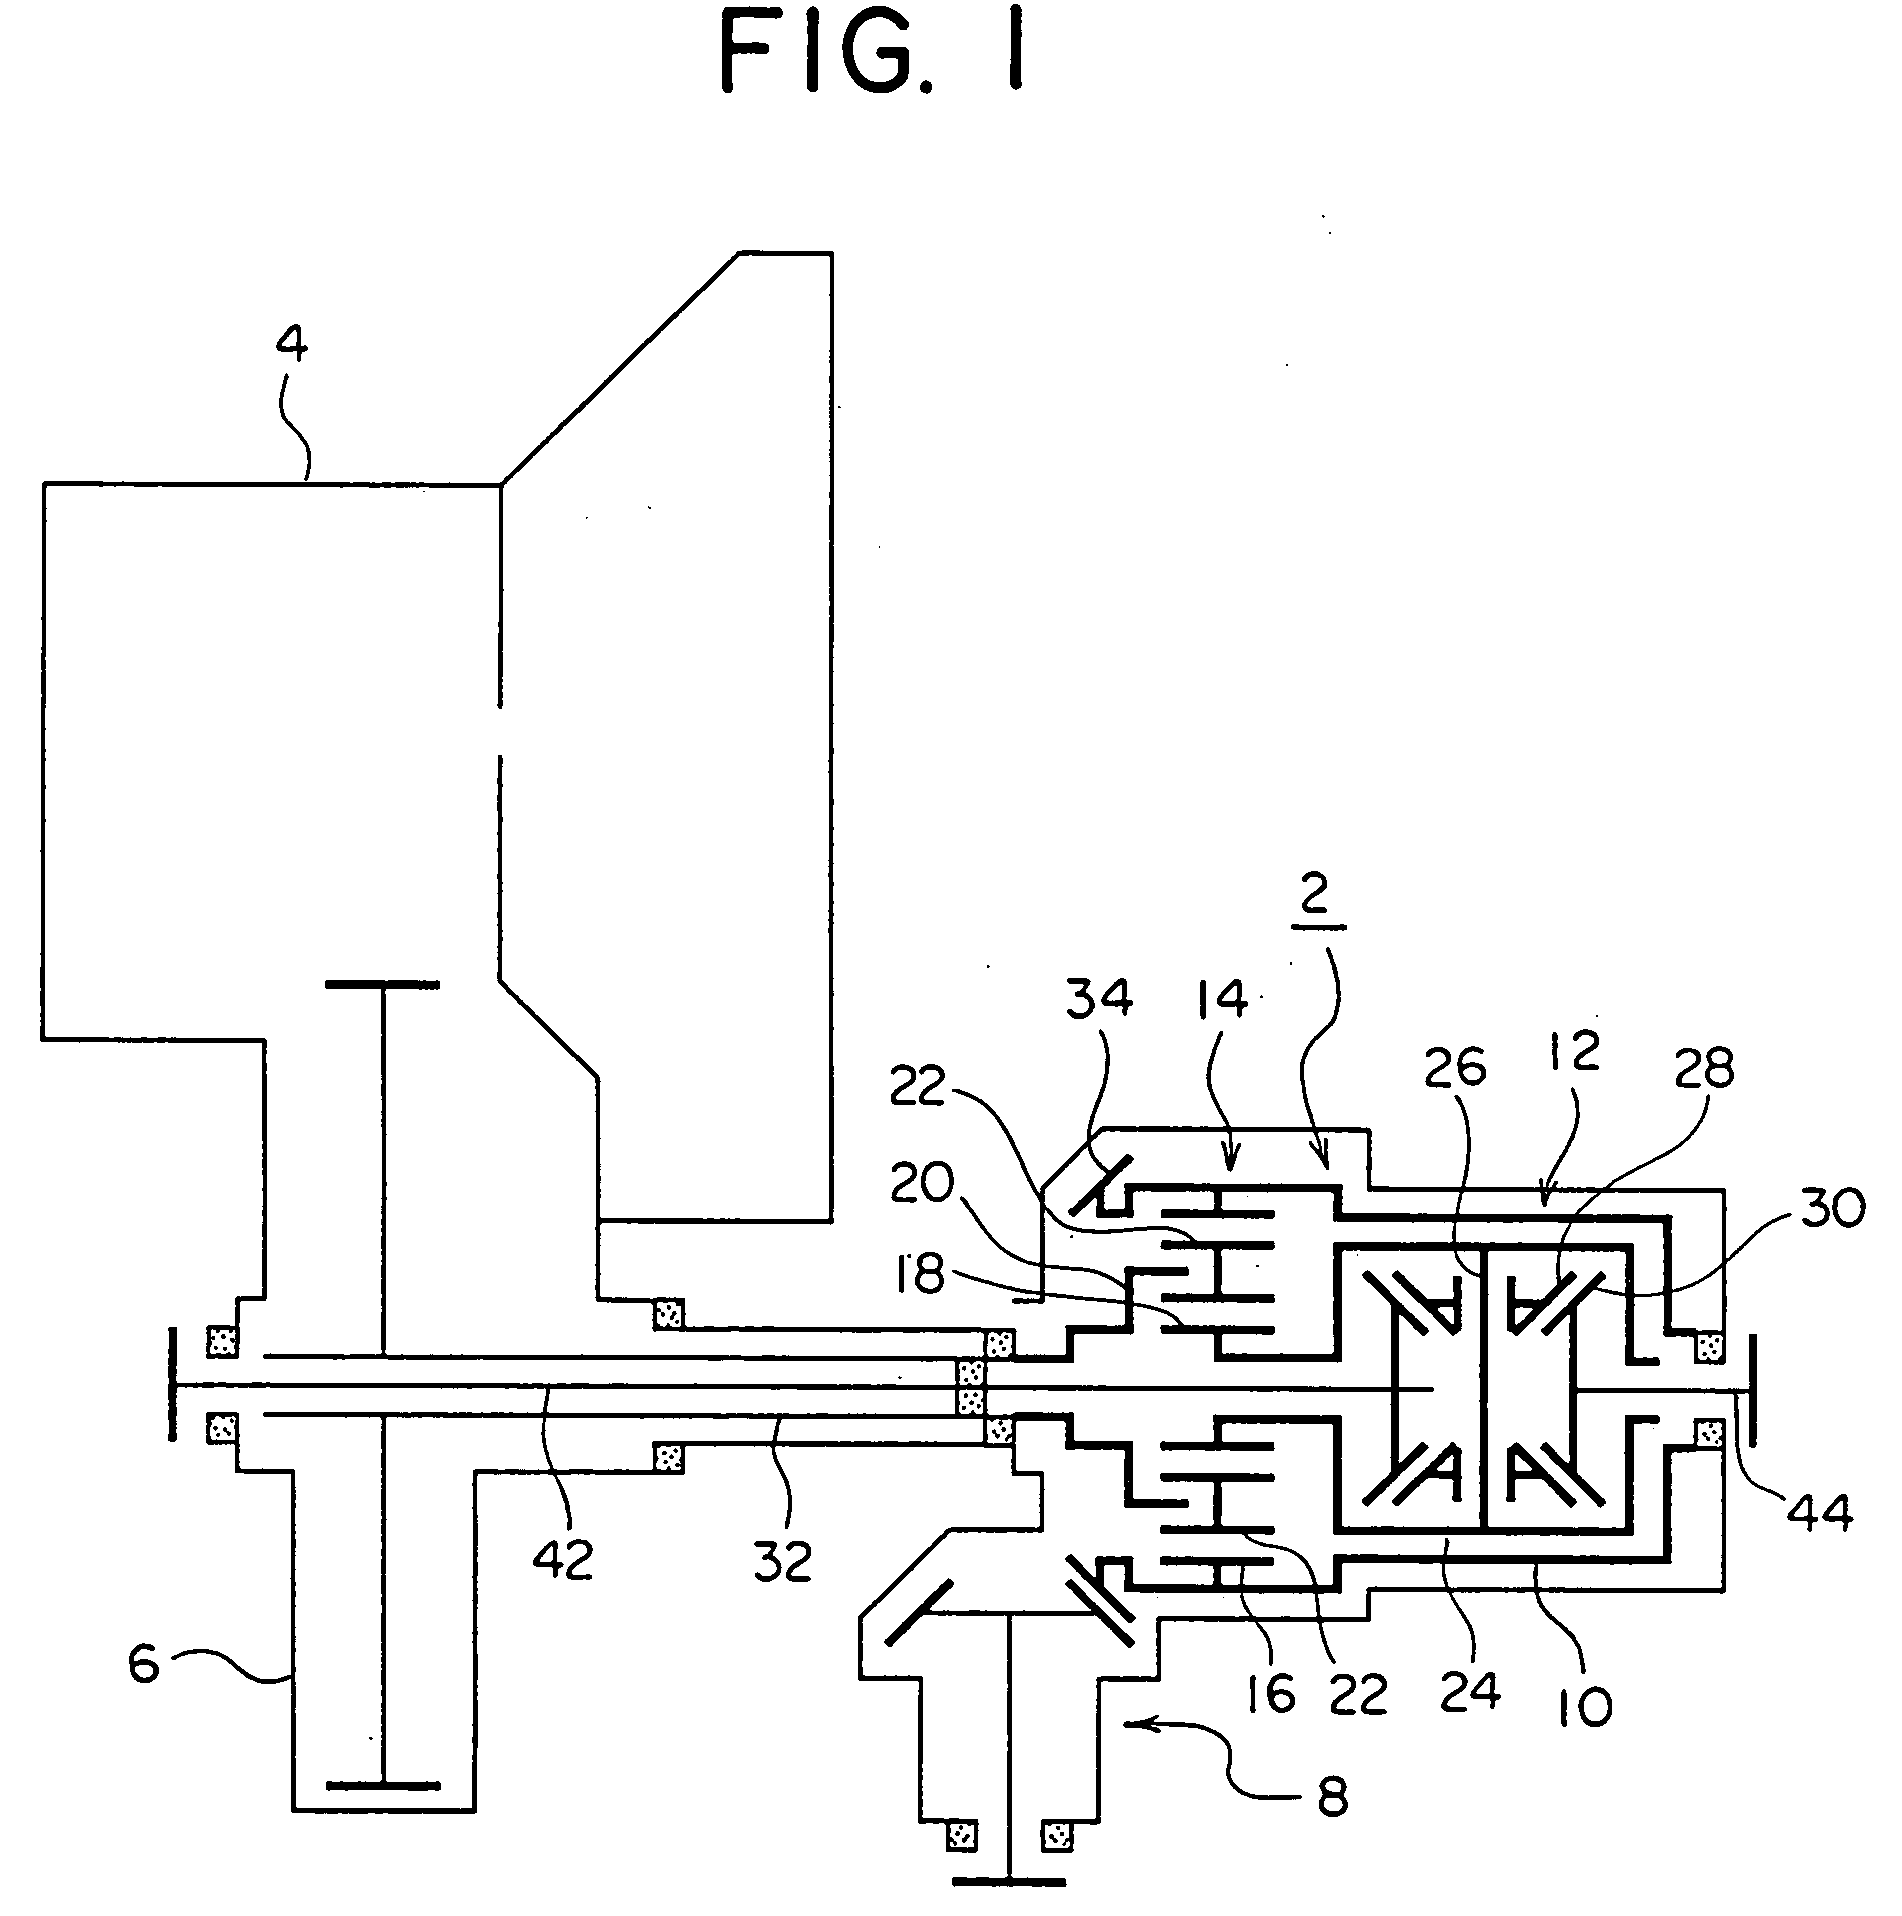 Power transmission system for vehicle